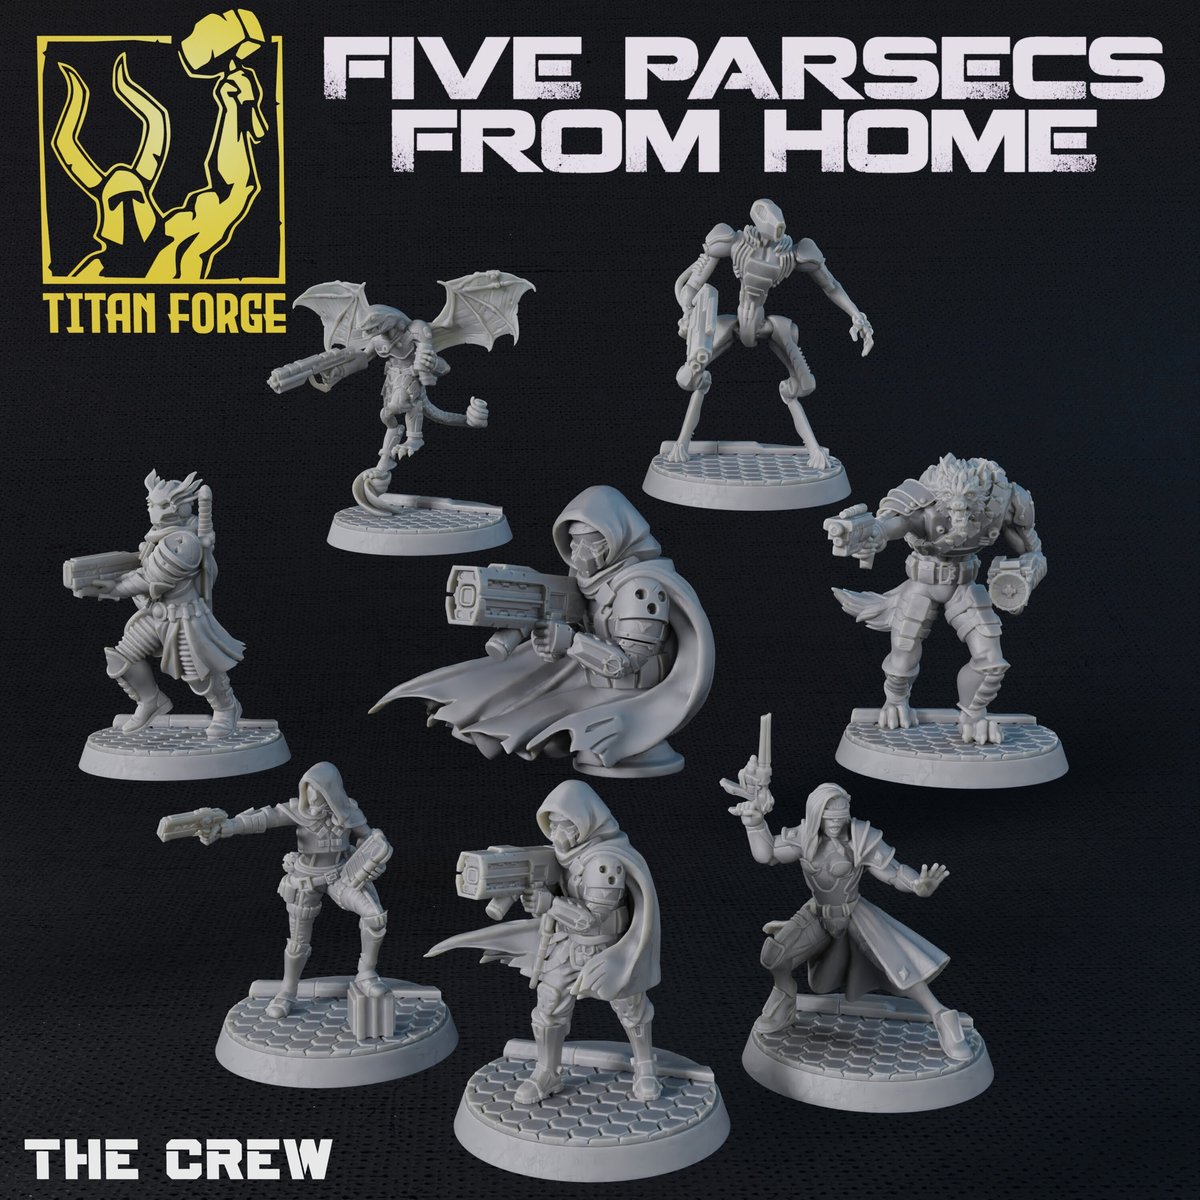 We have teamed-up with the folks over at Titan Forge to bring you these official #FiveParsecs From Home 3D-printable miniatures and terrain products. Grab them separately or in one big bundle!
🇬🇧 buff.ly/3OoxRRi
🇺🇸 buff.ly/3OybAk3
#stl #miniprinting